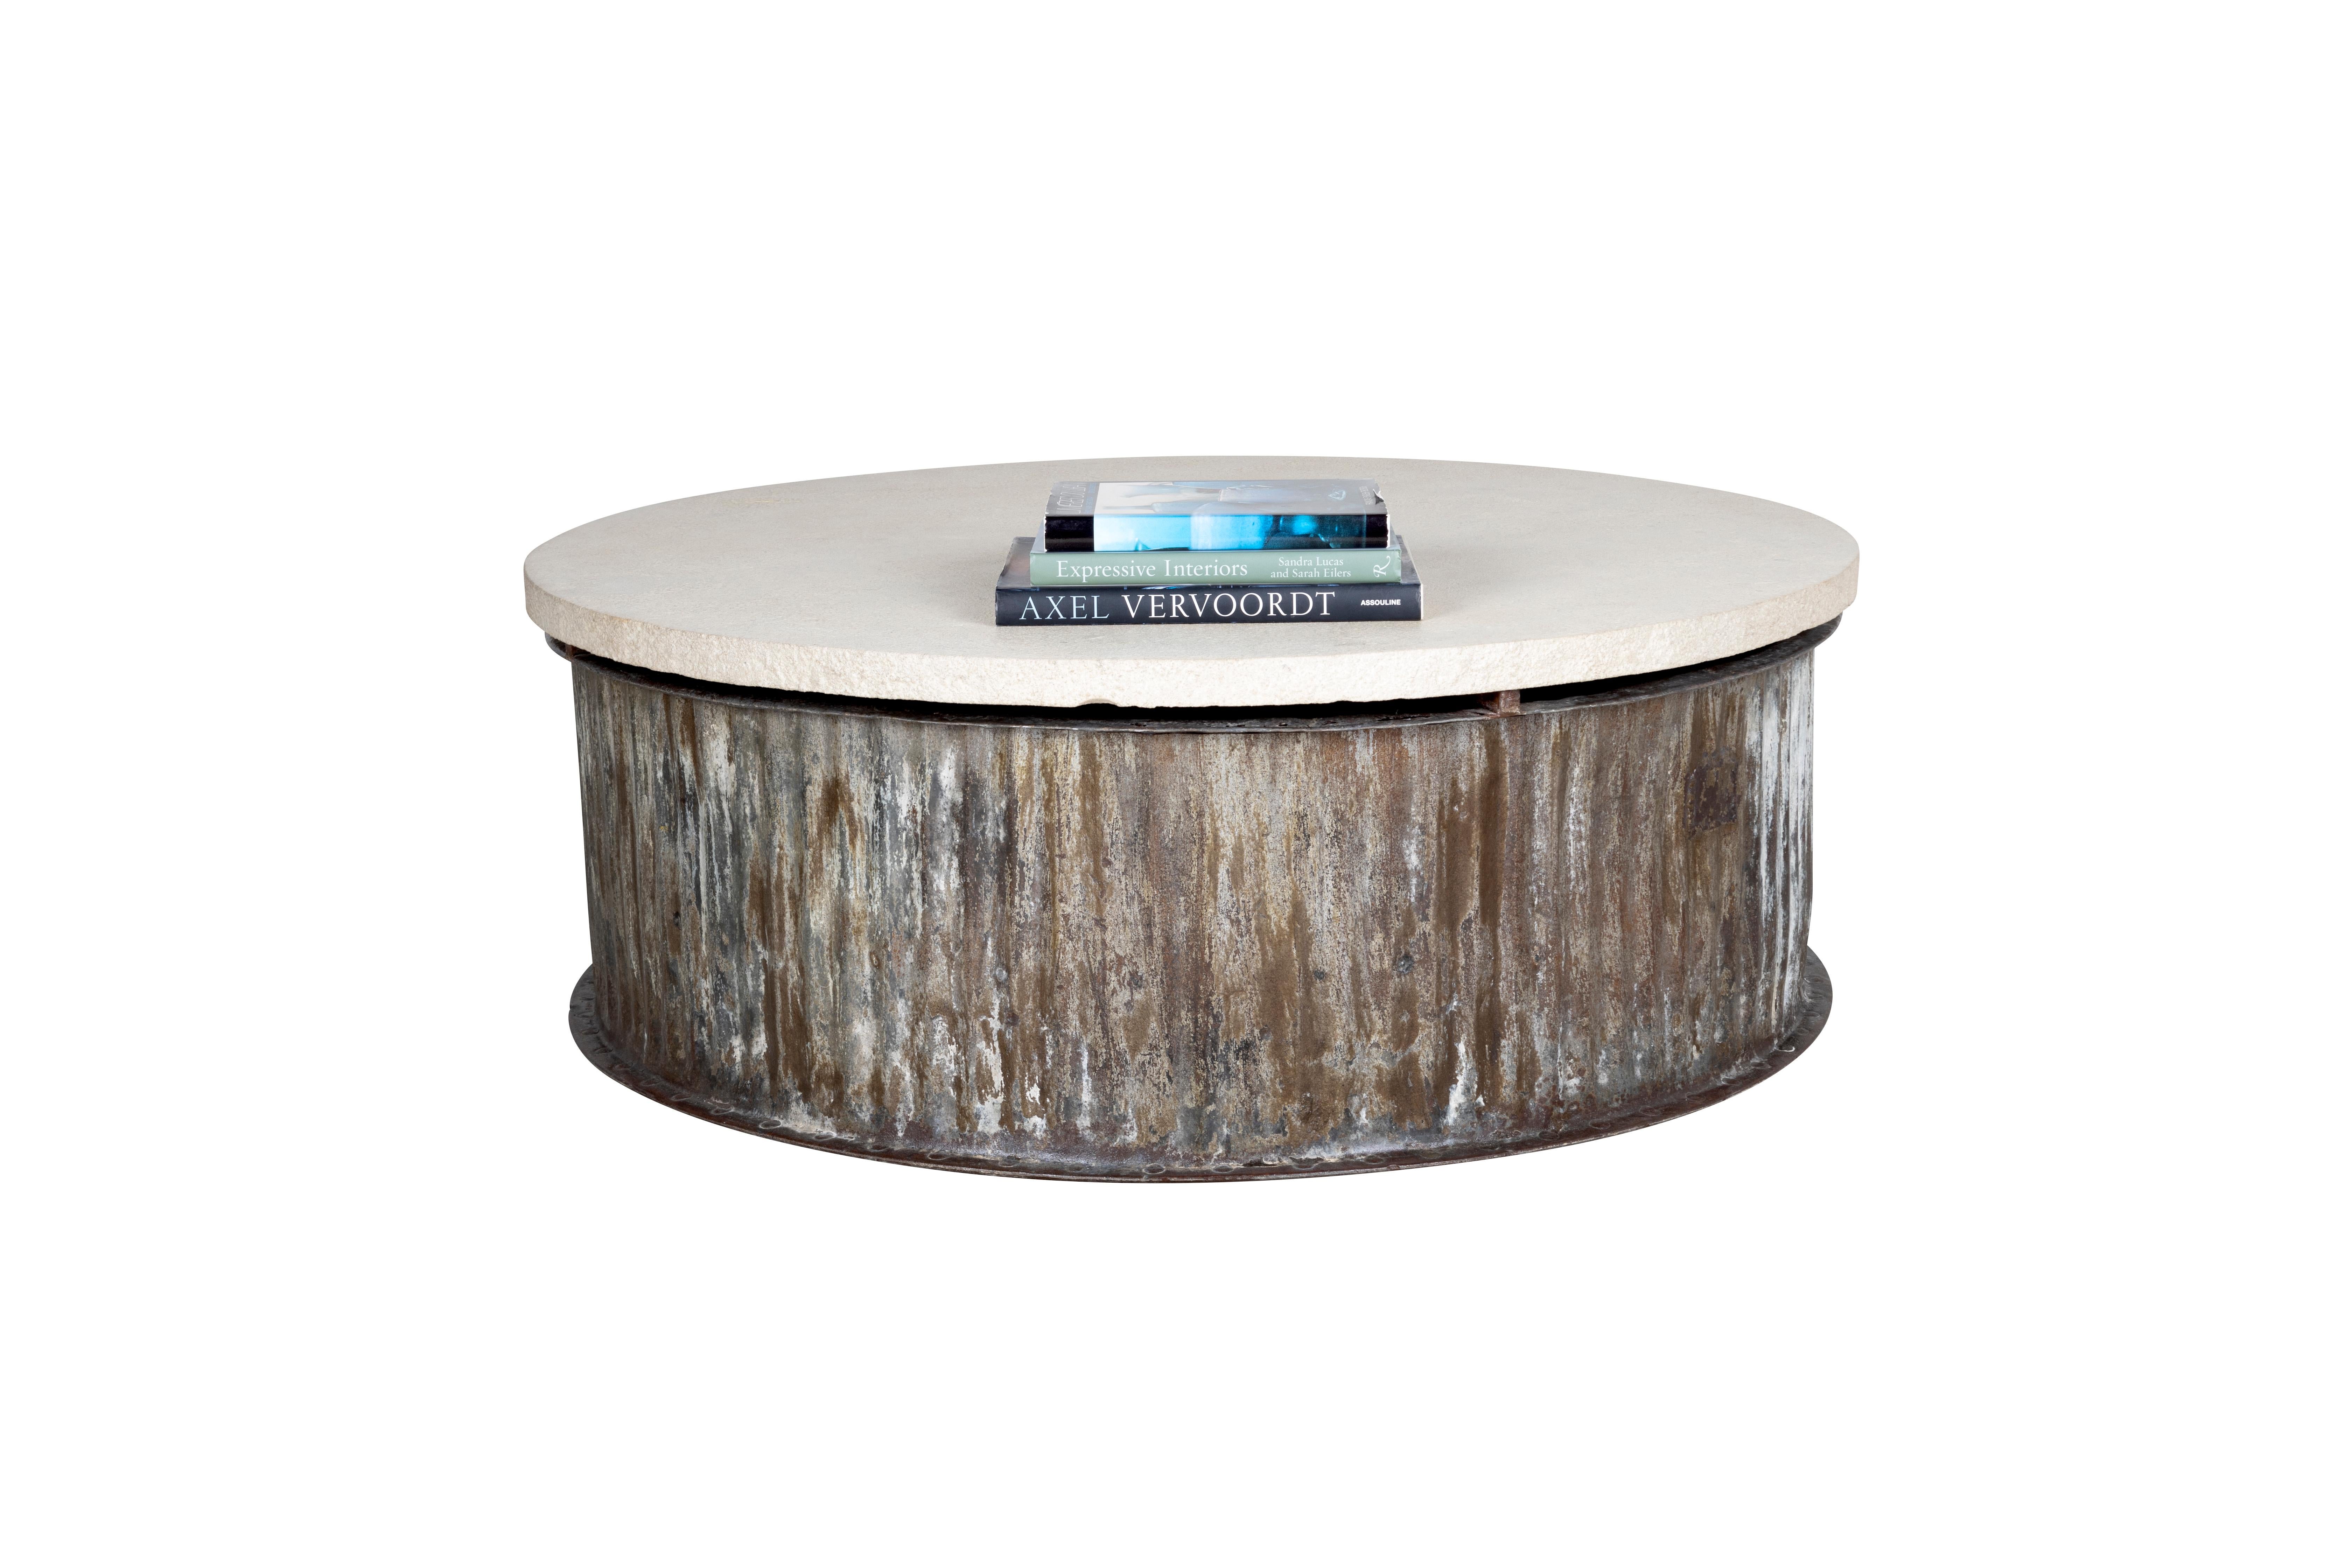 Create a classic, refined look with our weathered metal base bearing a Lueders limestone top coffee table. Our Weathered Metal Base Coffee Table brings a striking design to your living room. A weathered metal base complements the unique gray tone of